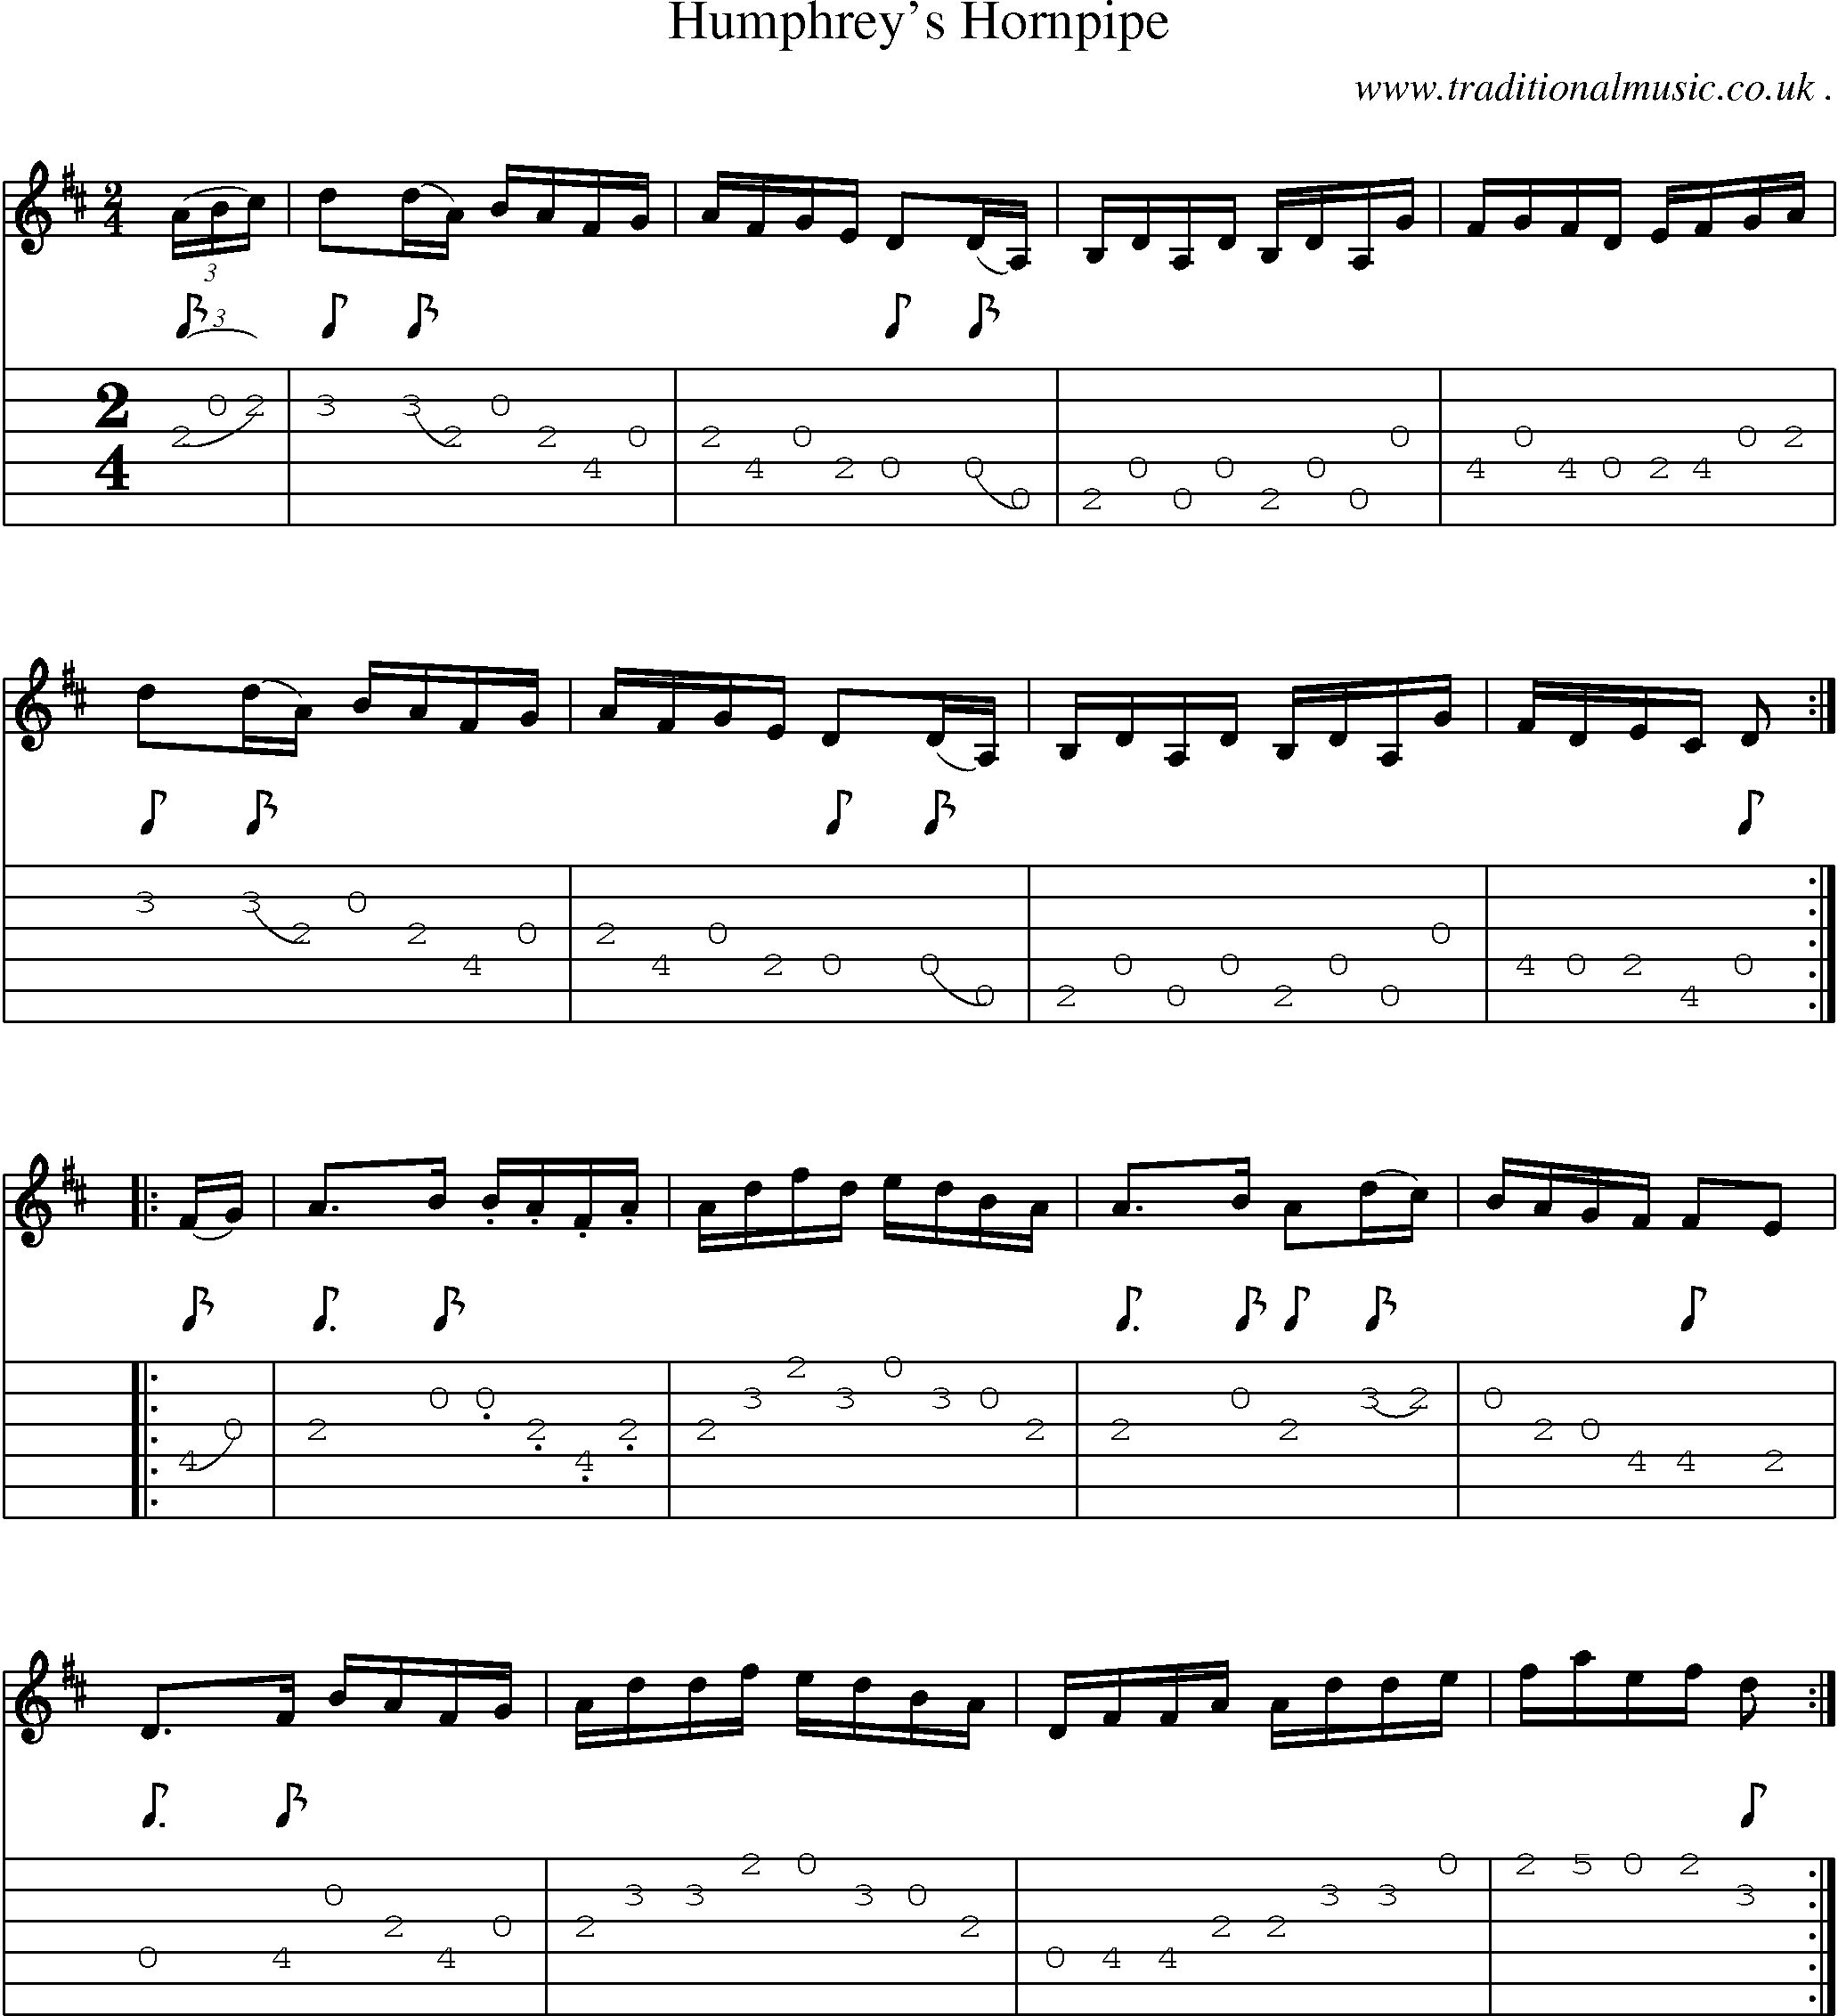 Sheet-Music and Guitar Tabs for Humphreys Hornpipe